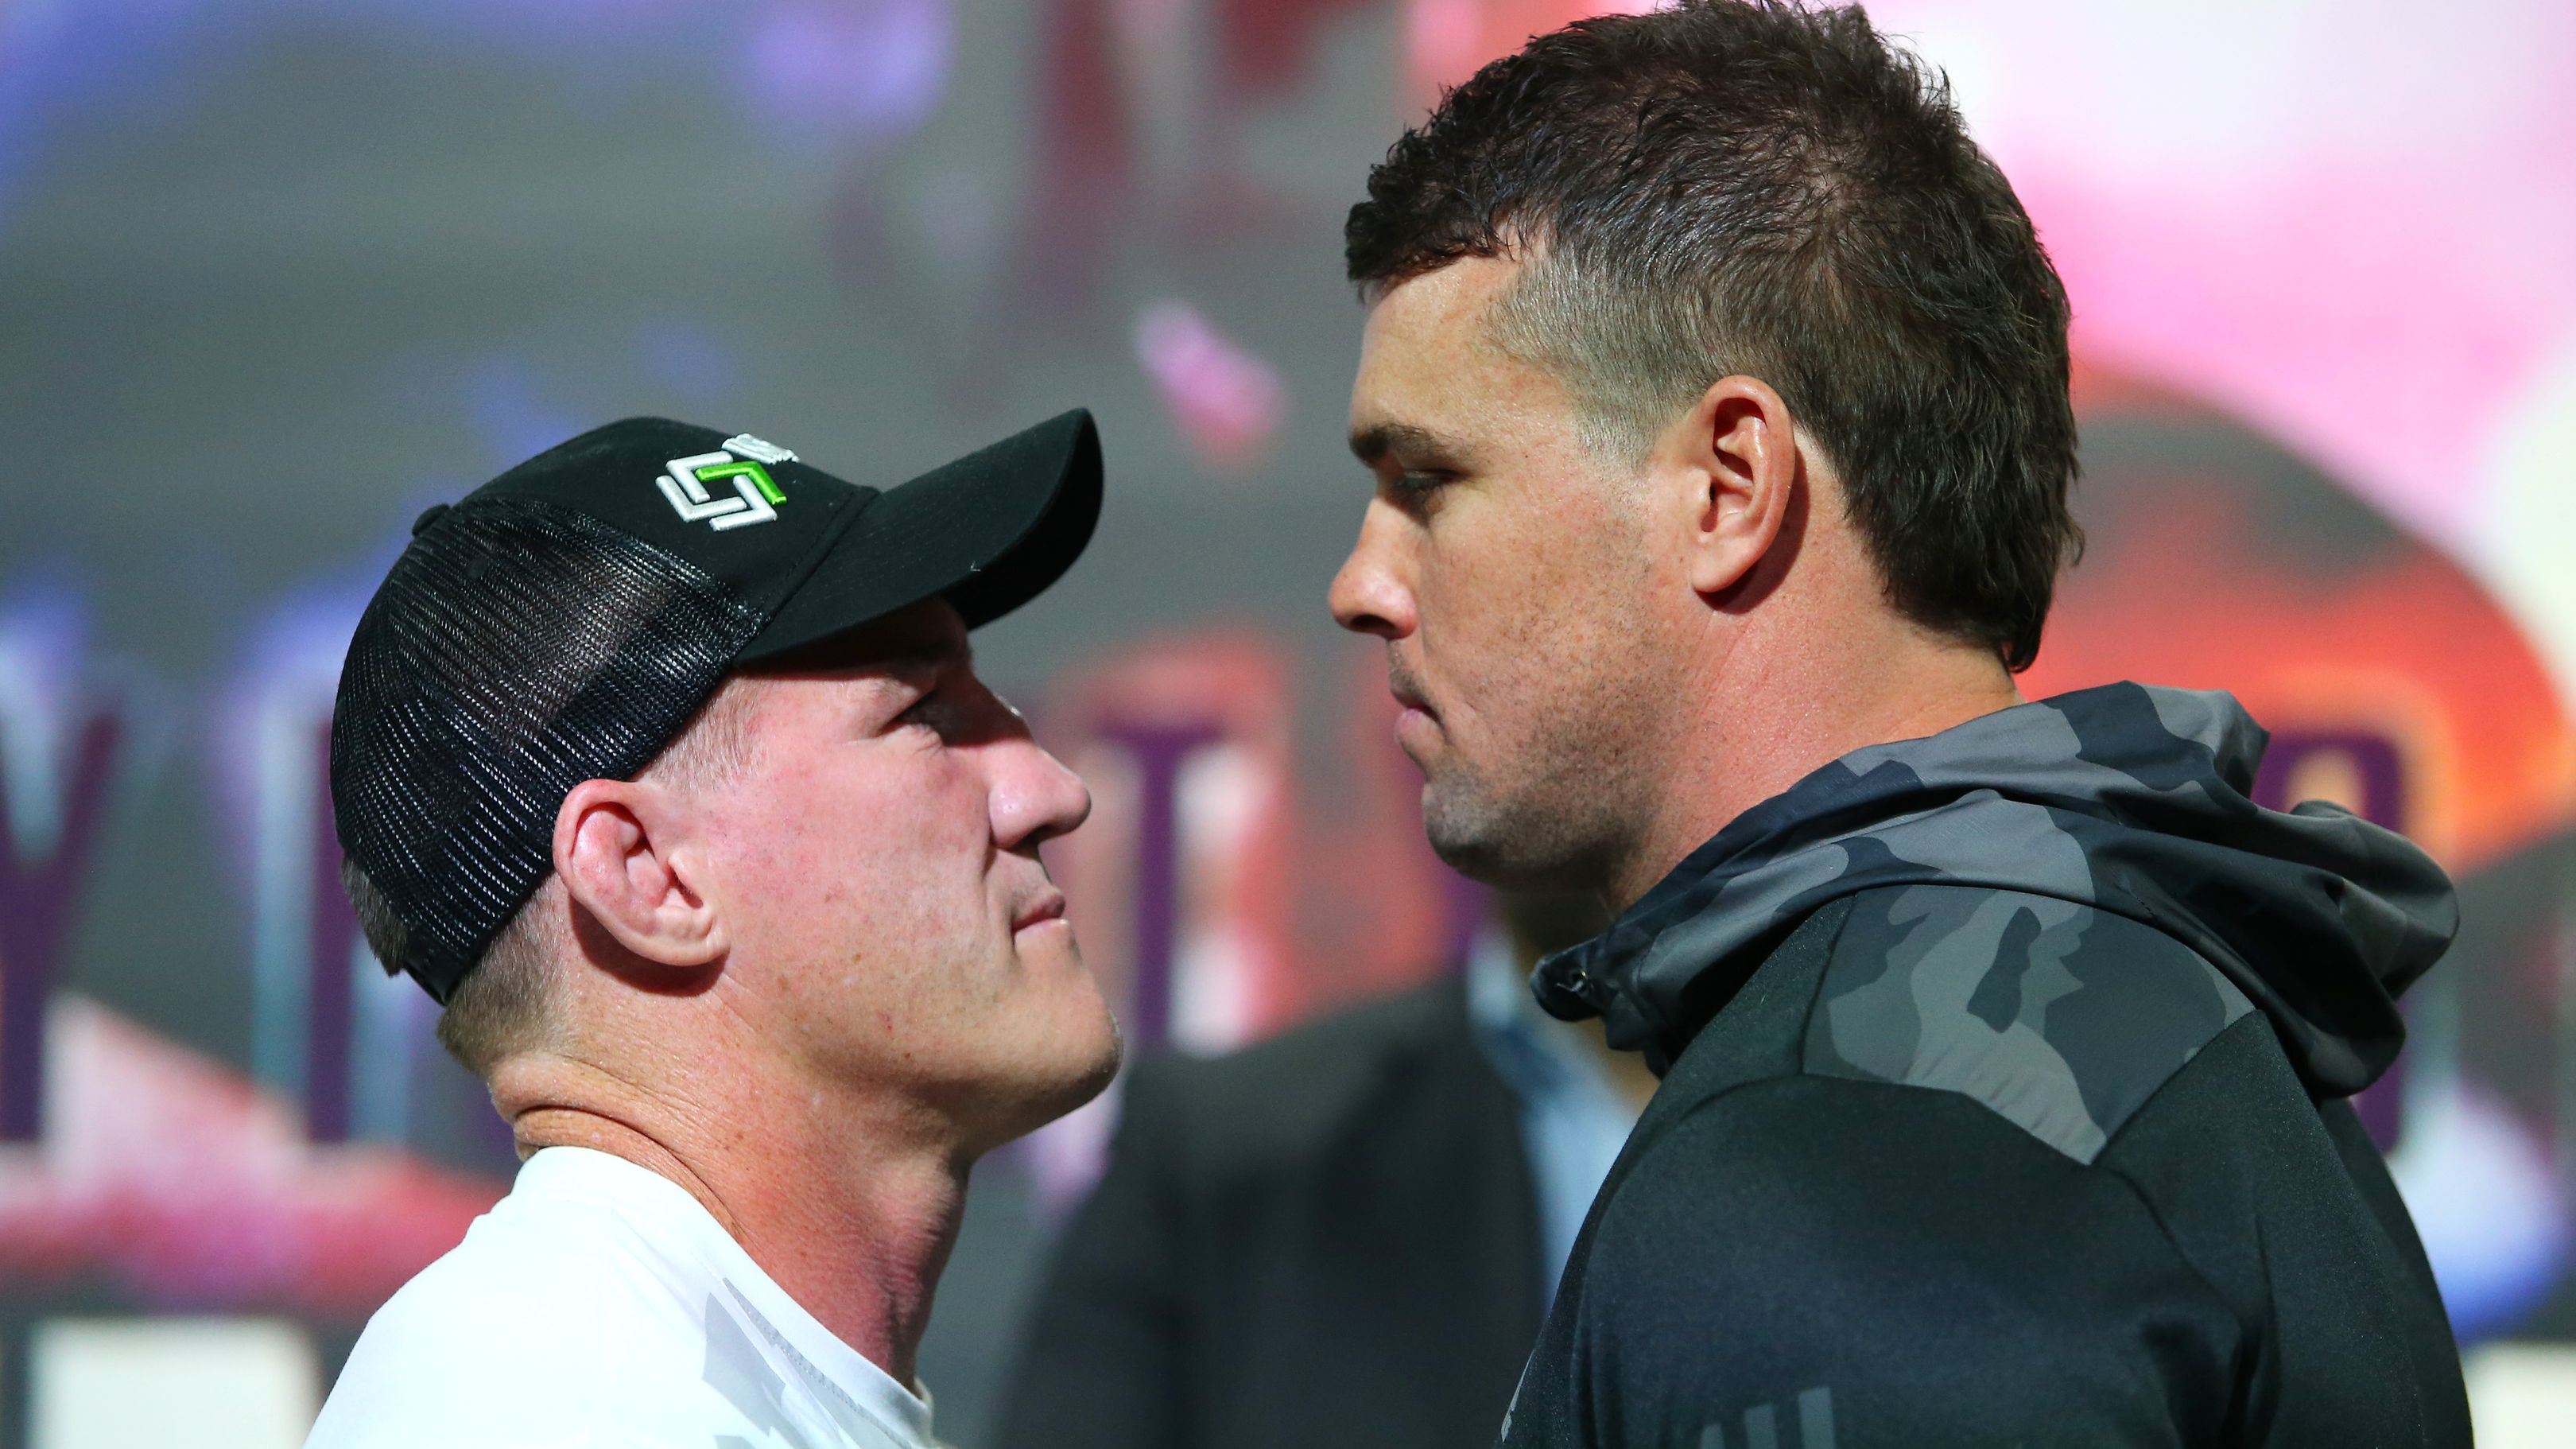 Paul Gallen and Darcy Lussick face off during a press conference ahead of their fight on December 22.